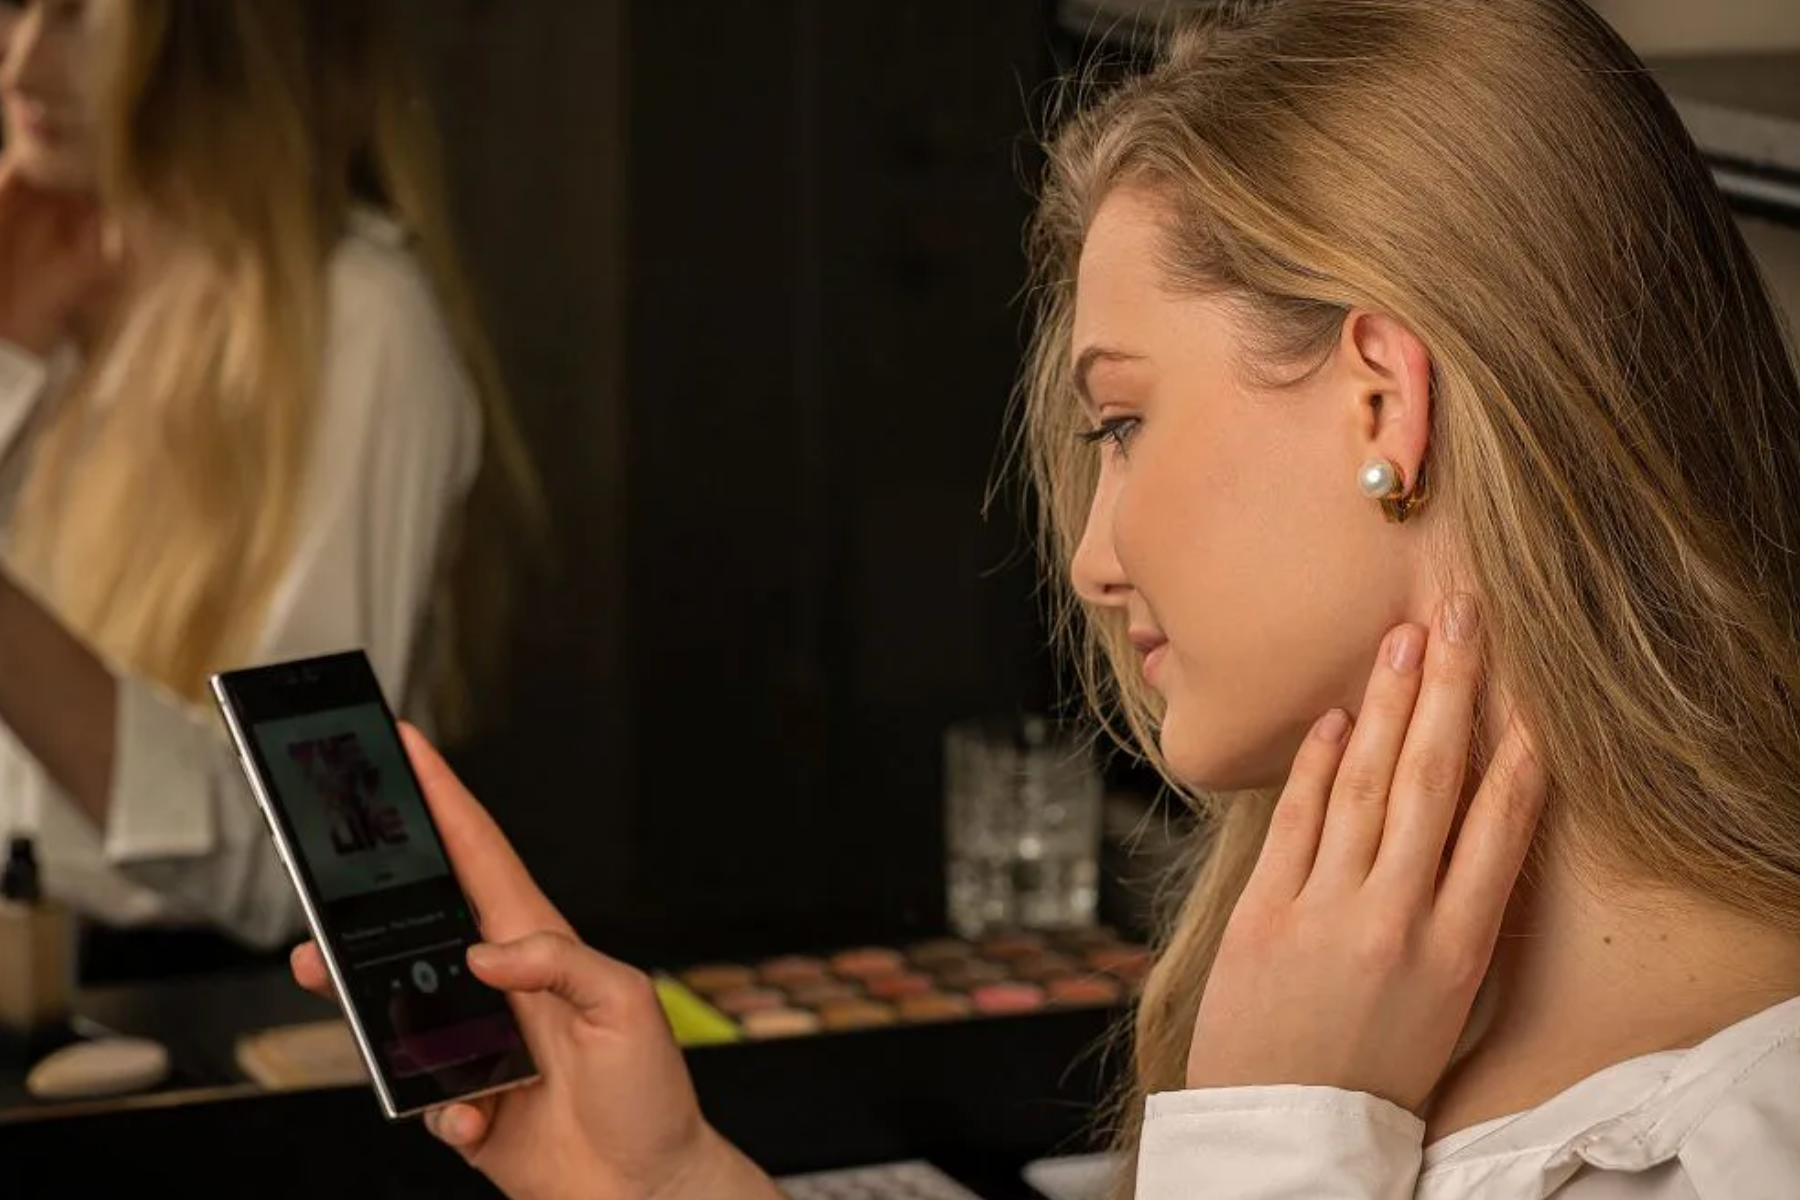 These Pearl Earrings Are Actually Wireless Headphones